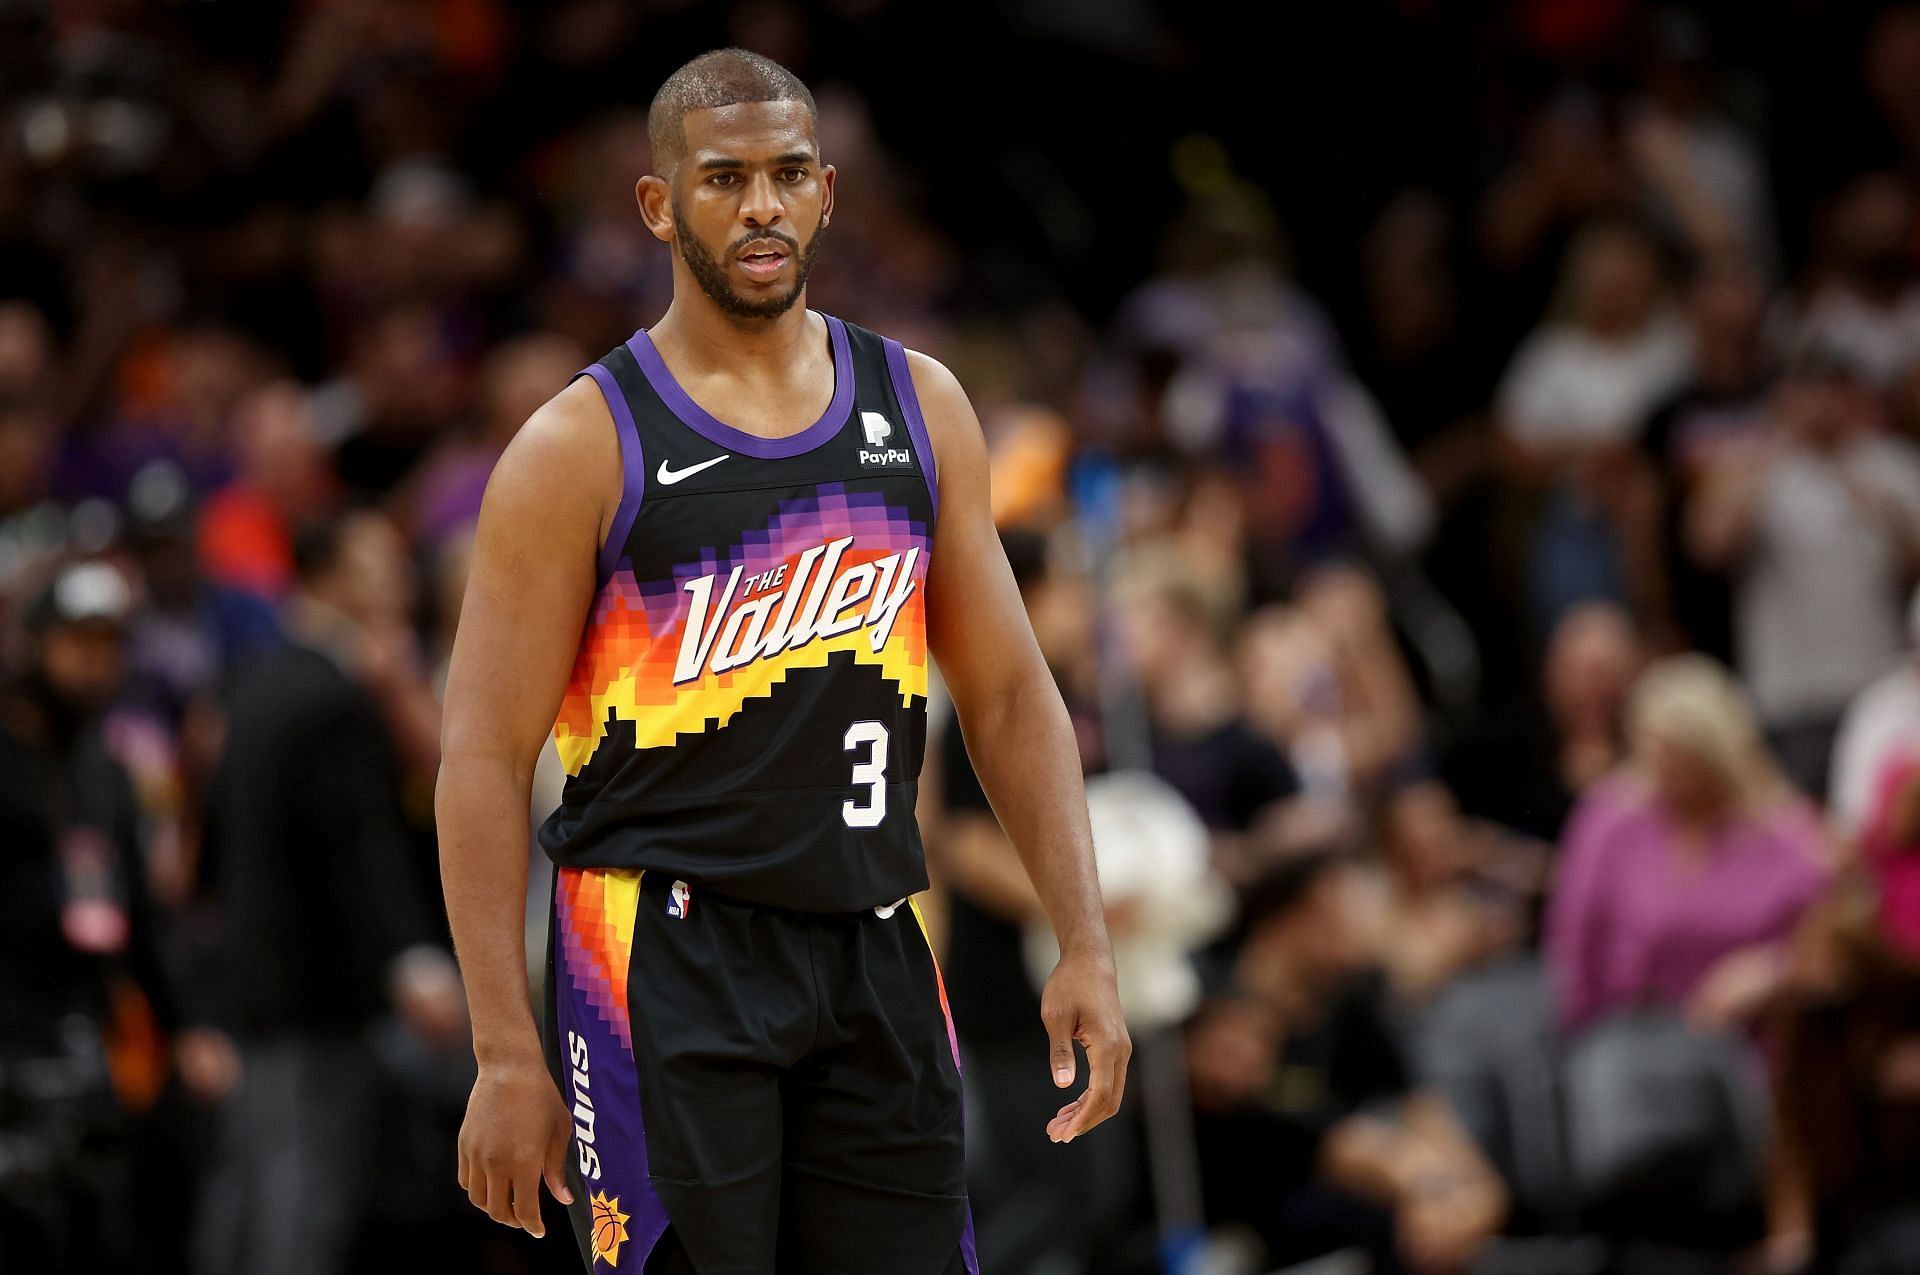 Chris Paul lead his team with 30 points in Game 1